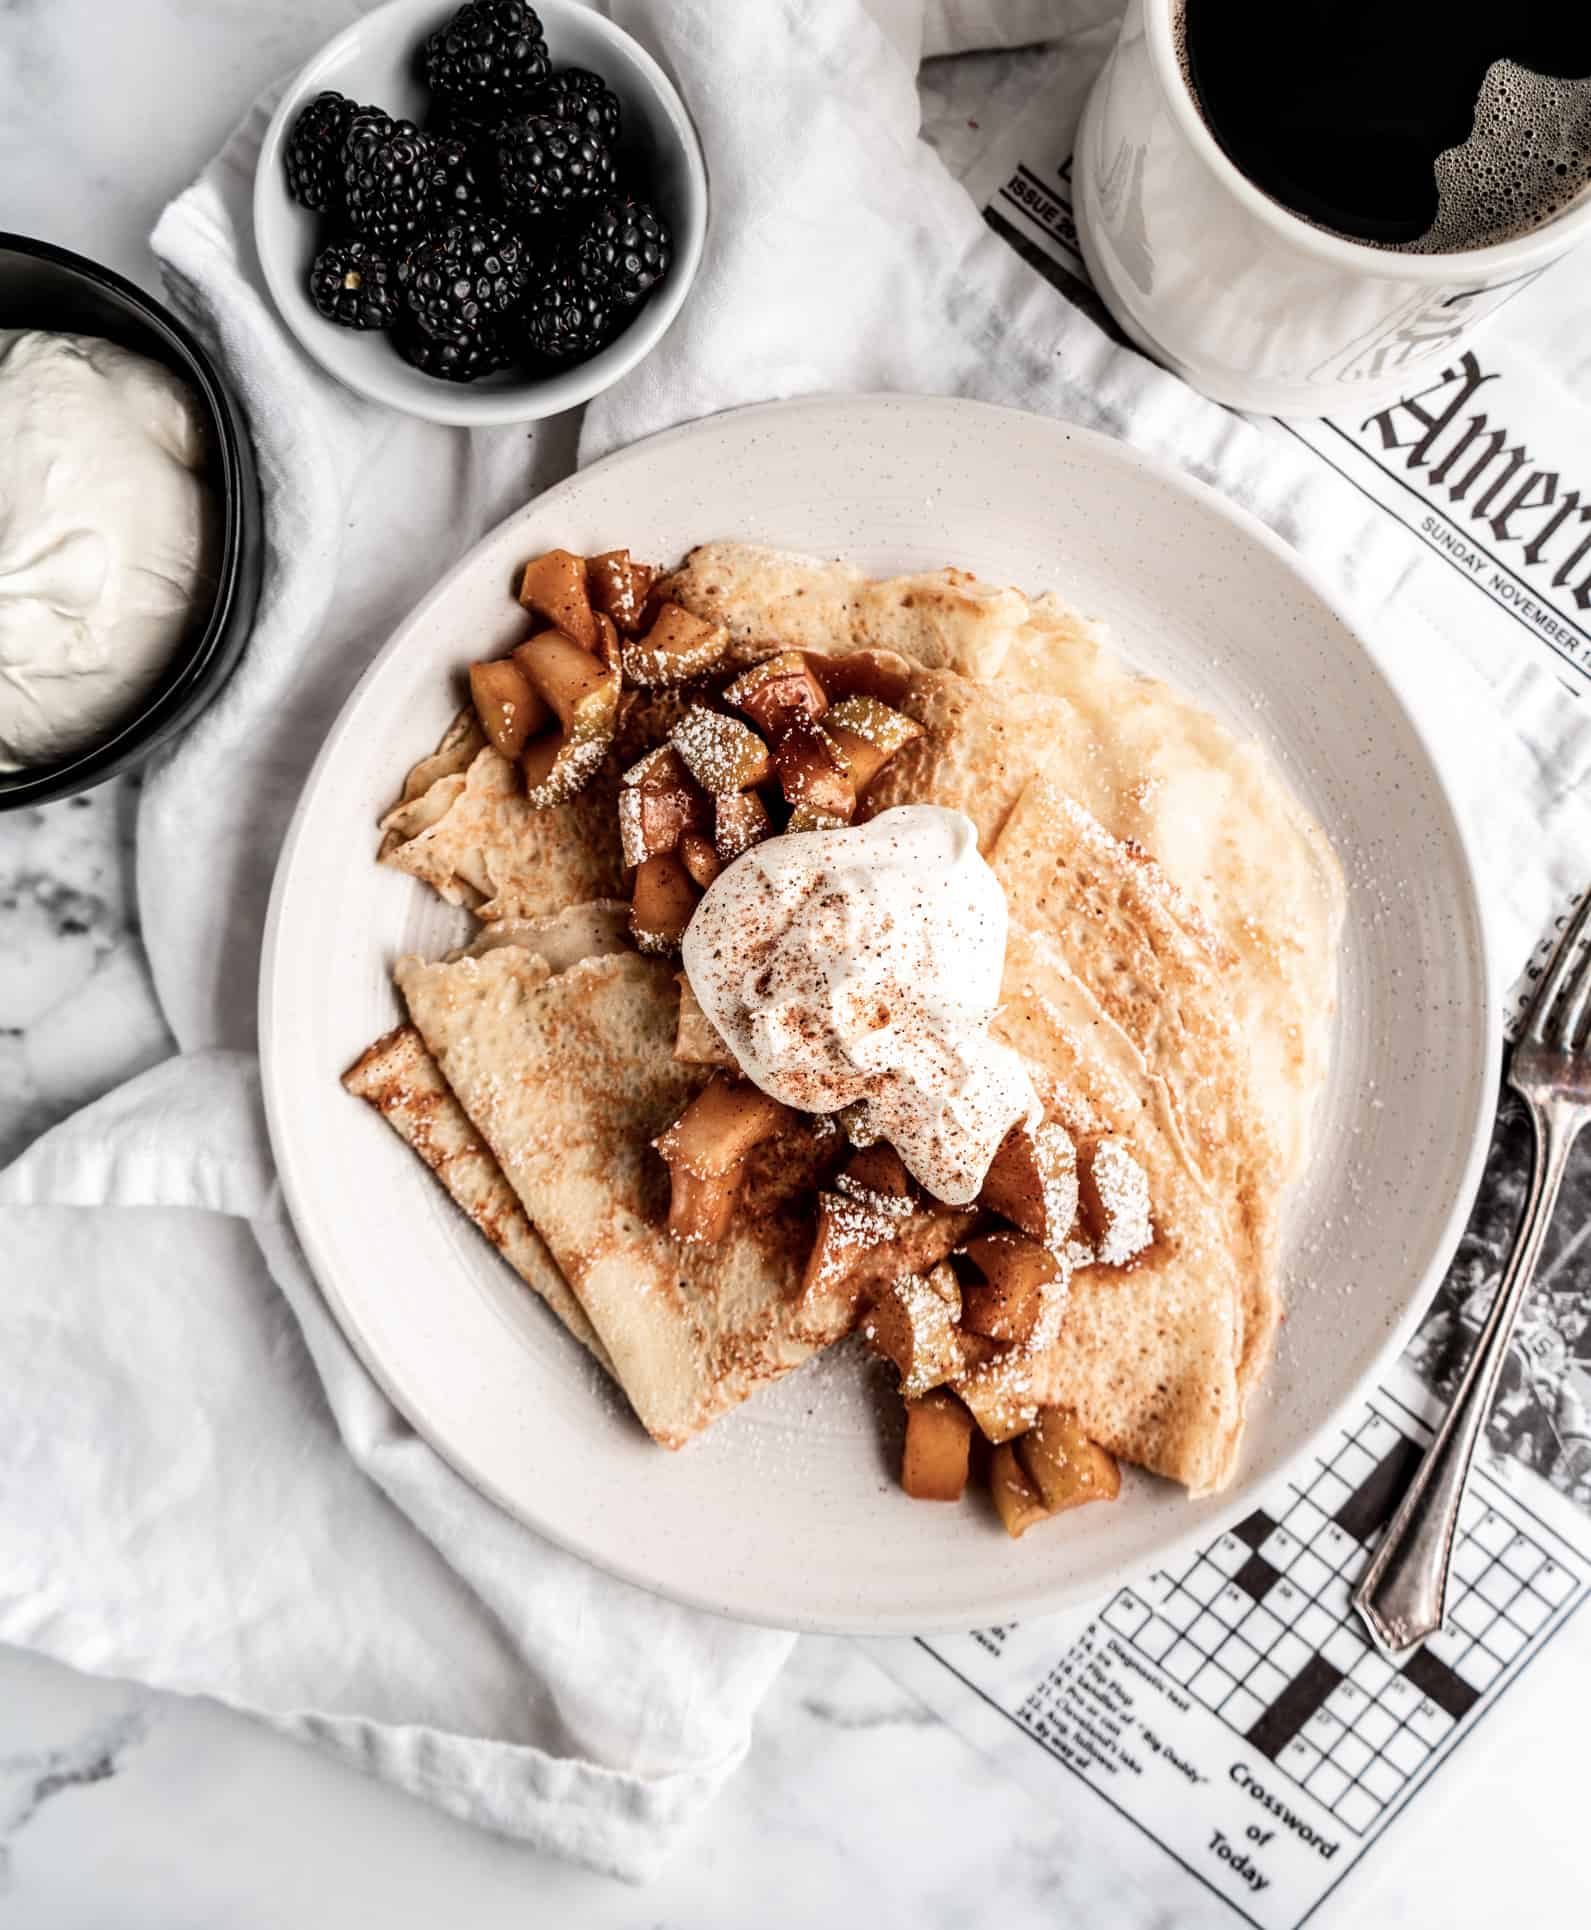 How To Make Crepes - Live Well Bake Often